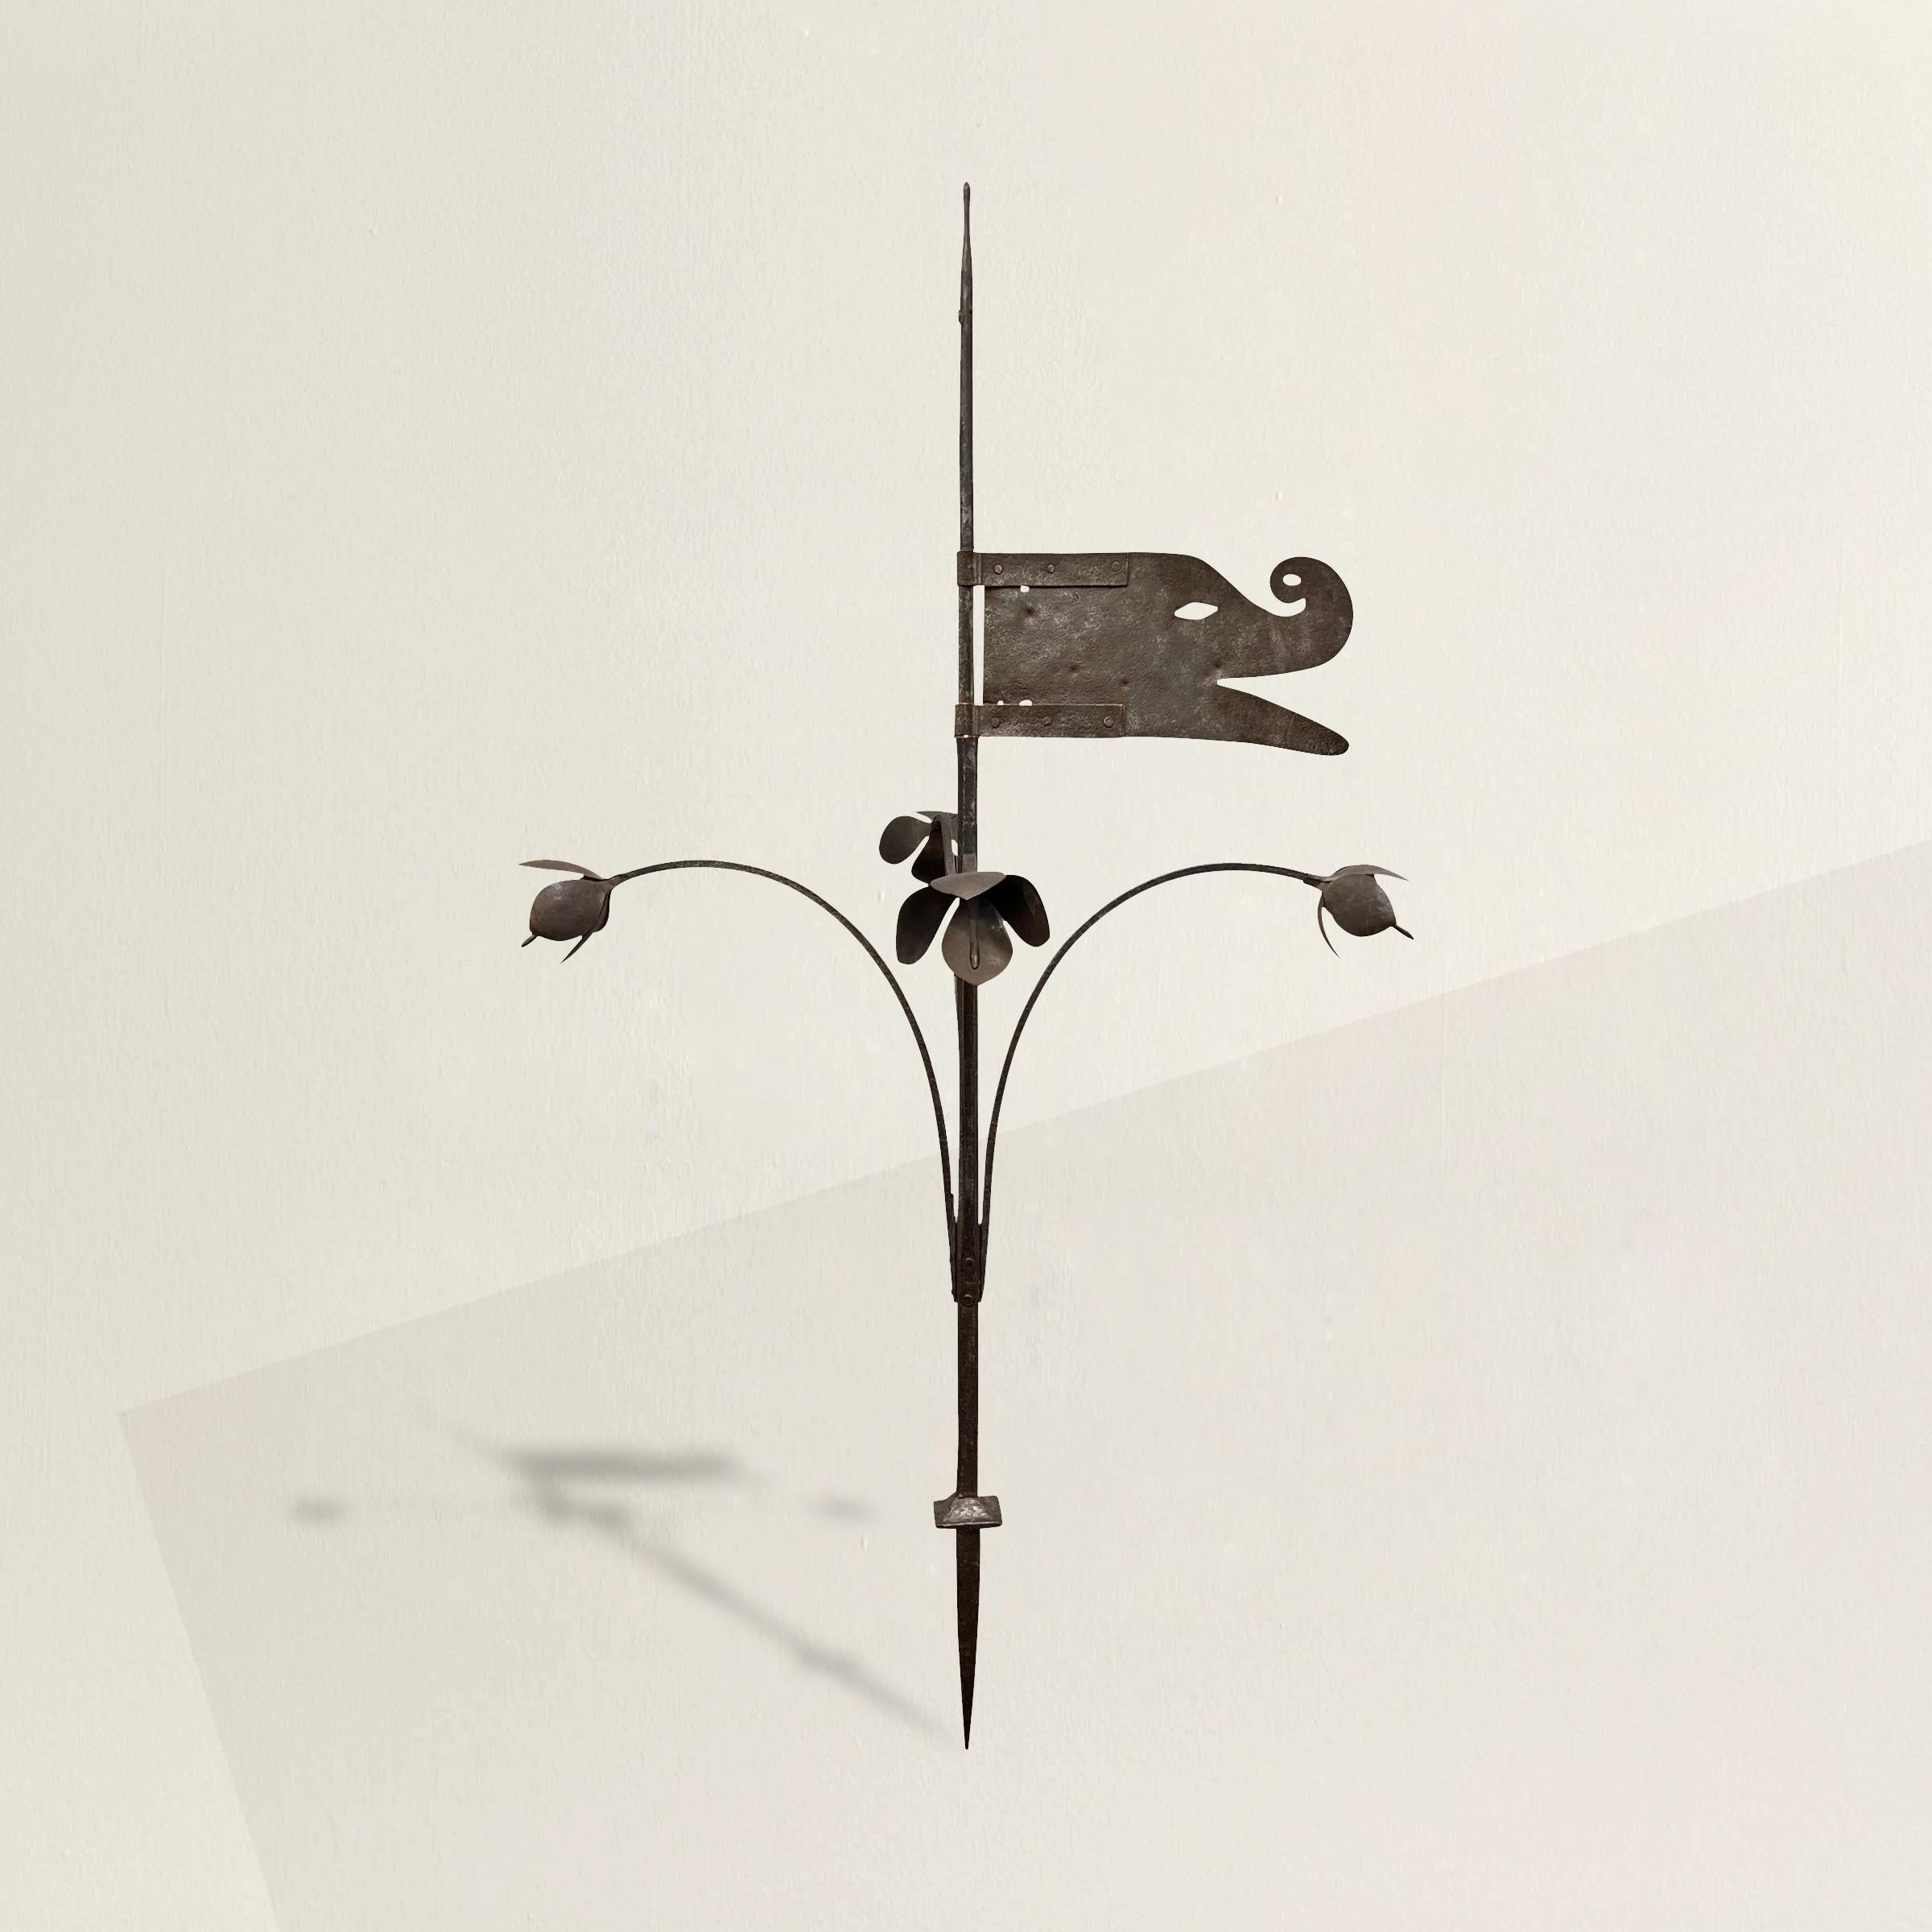 A stunning and rare 18th century French hand-wrought iron weathervane, from Normandy, with a stylized dragon 